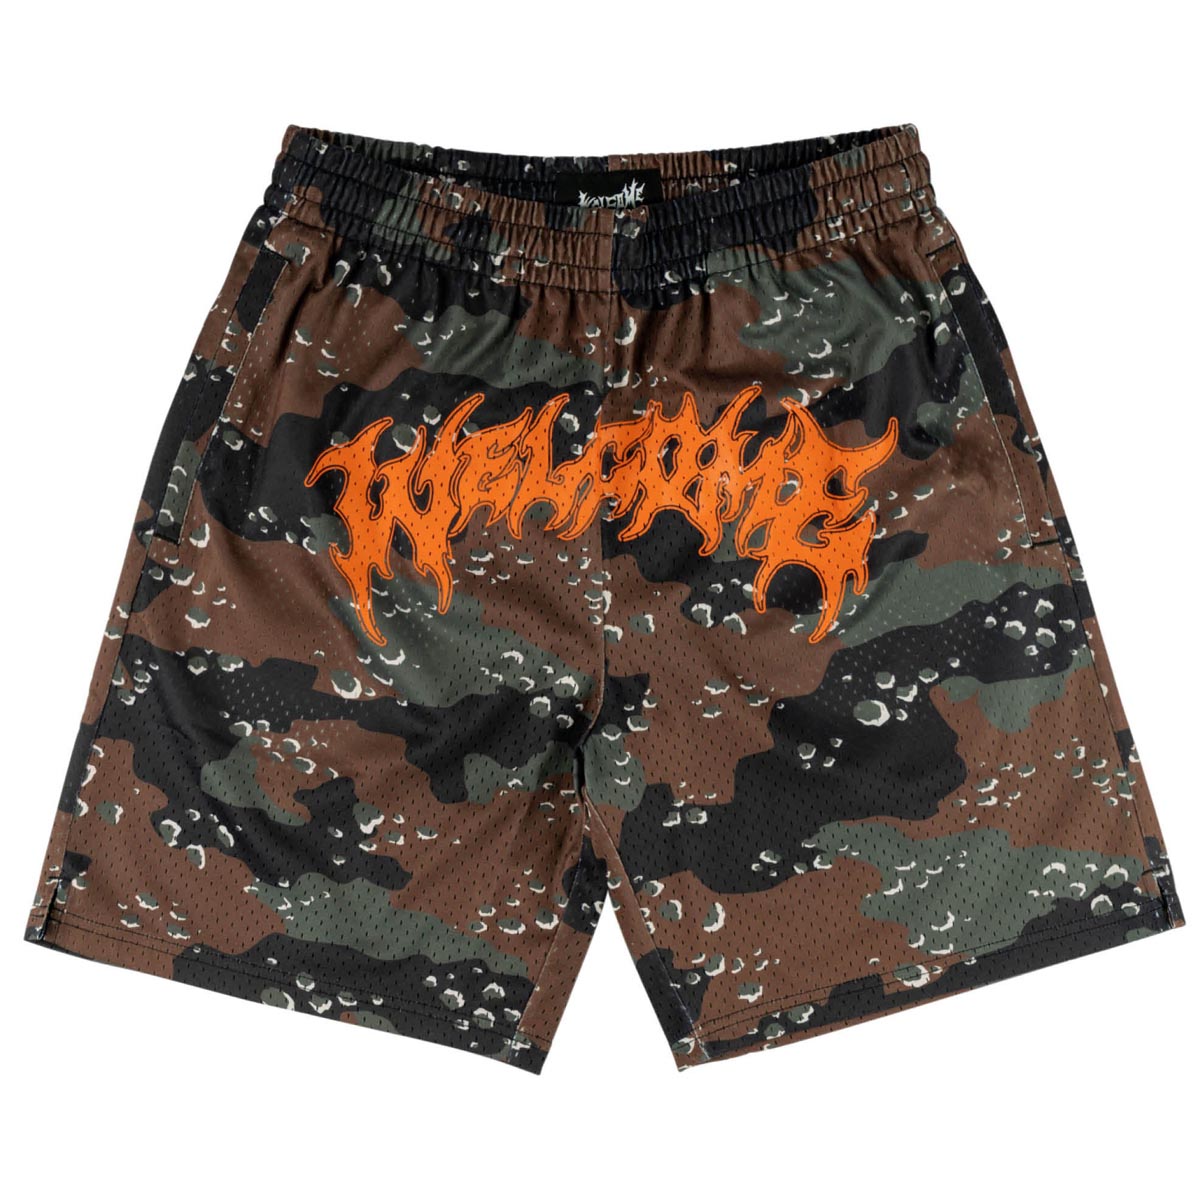 Welcome Barb Mesh Shorts - Timber image 1